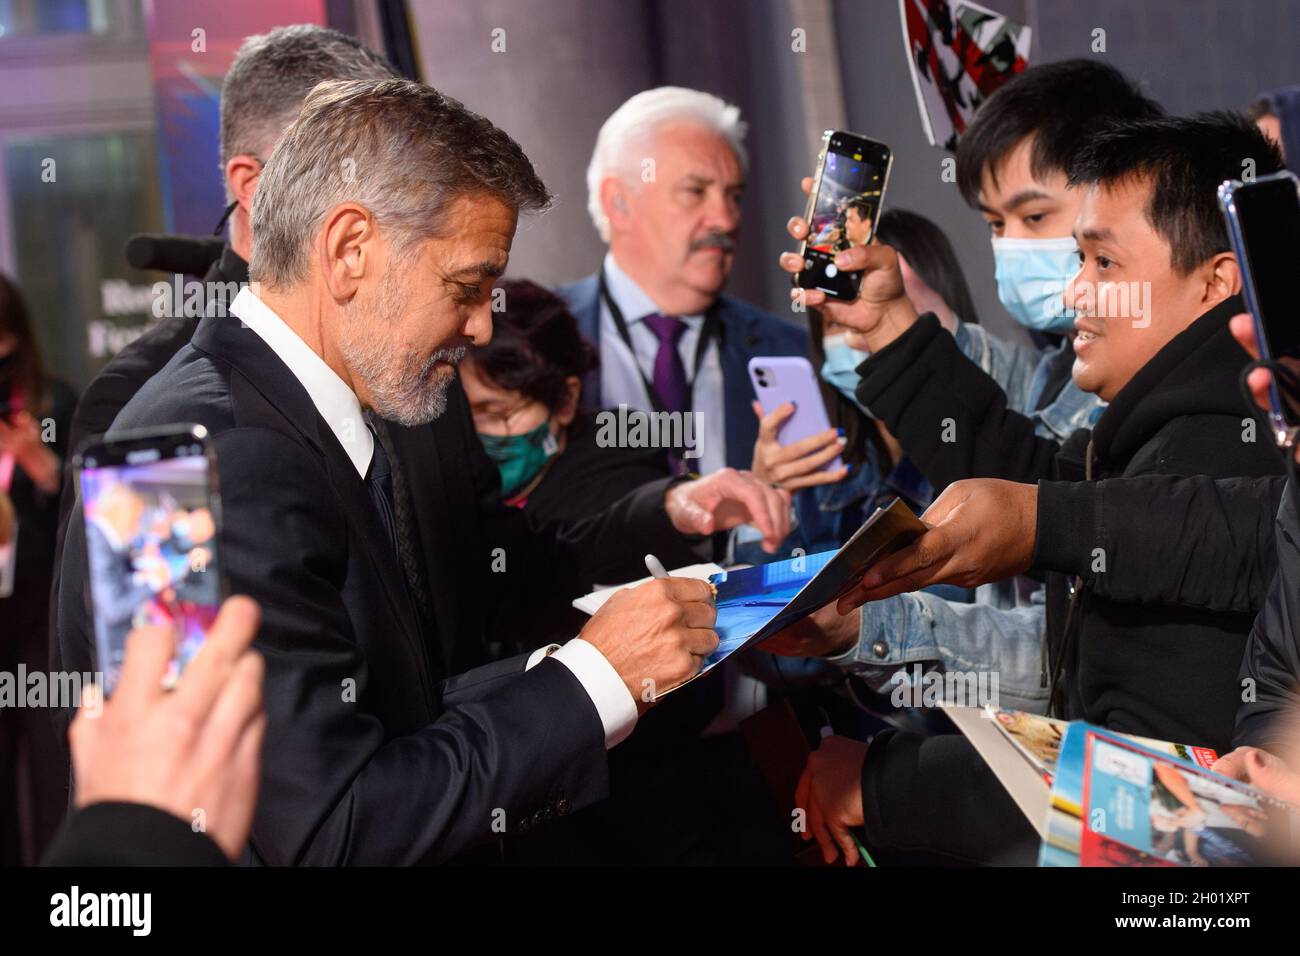 London, UK. 10 October 2021. George Clooney arrives for the UK premiere of 'The Tender Bar', at the Royal Festival Hall in London during the BFI London Film Festival Picture date: Sunday October 10, 2021. Photo credit should read: Matt Crossick/Empics/Alamy Live News Stock Photo